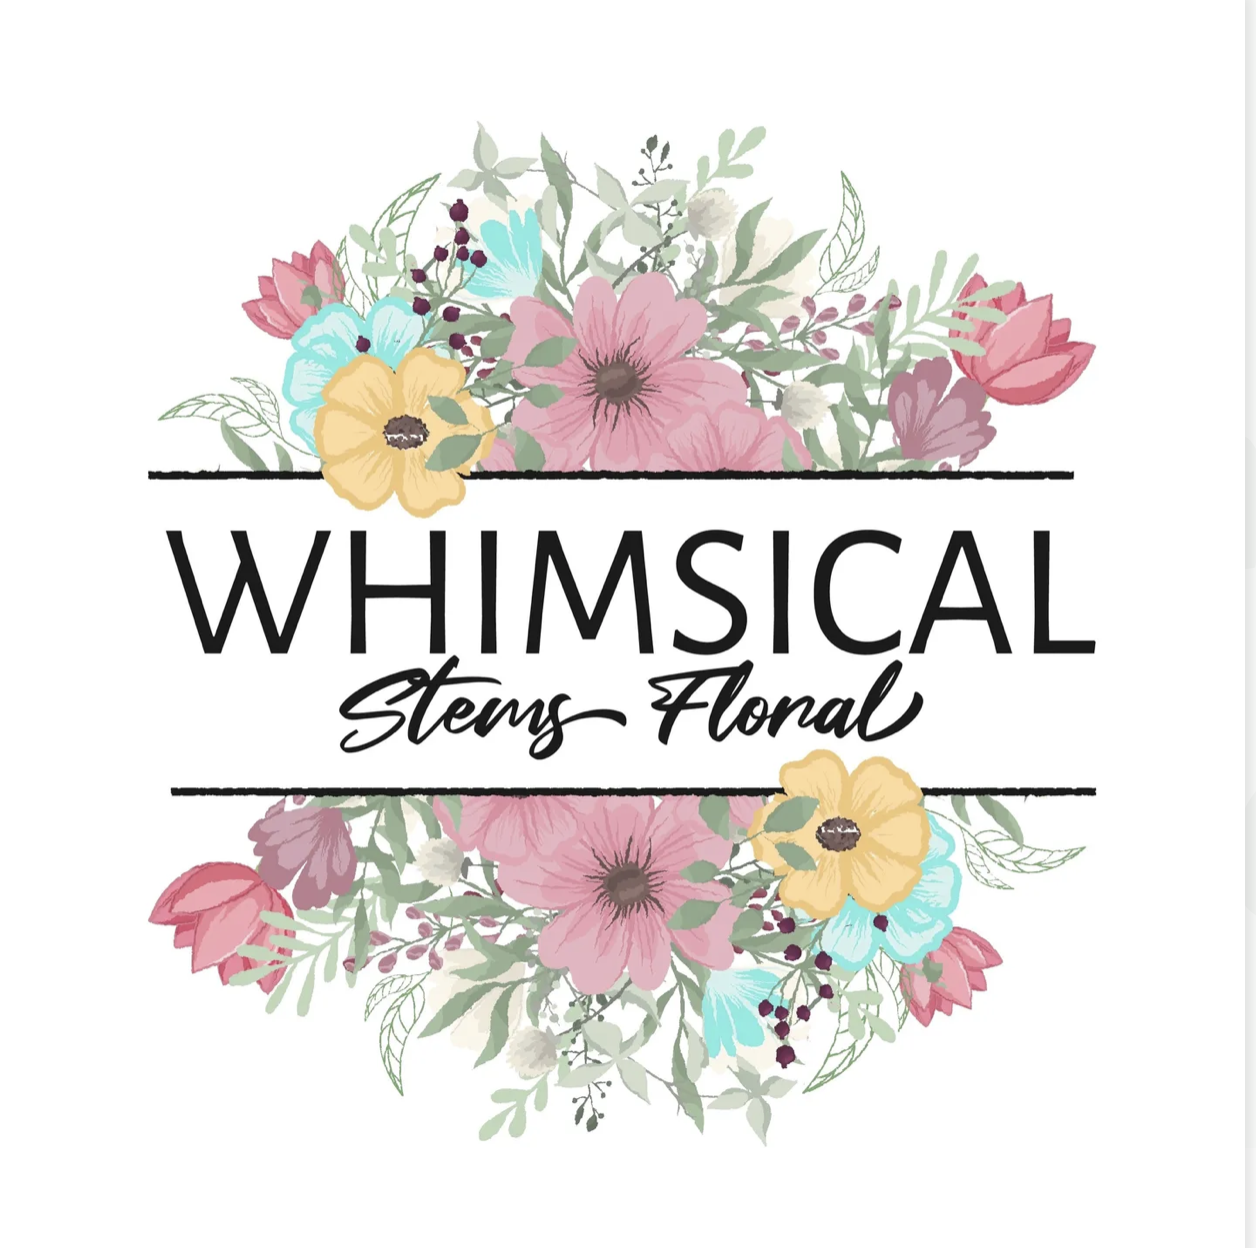 Whimsical Stems Floral